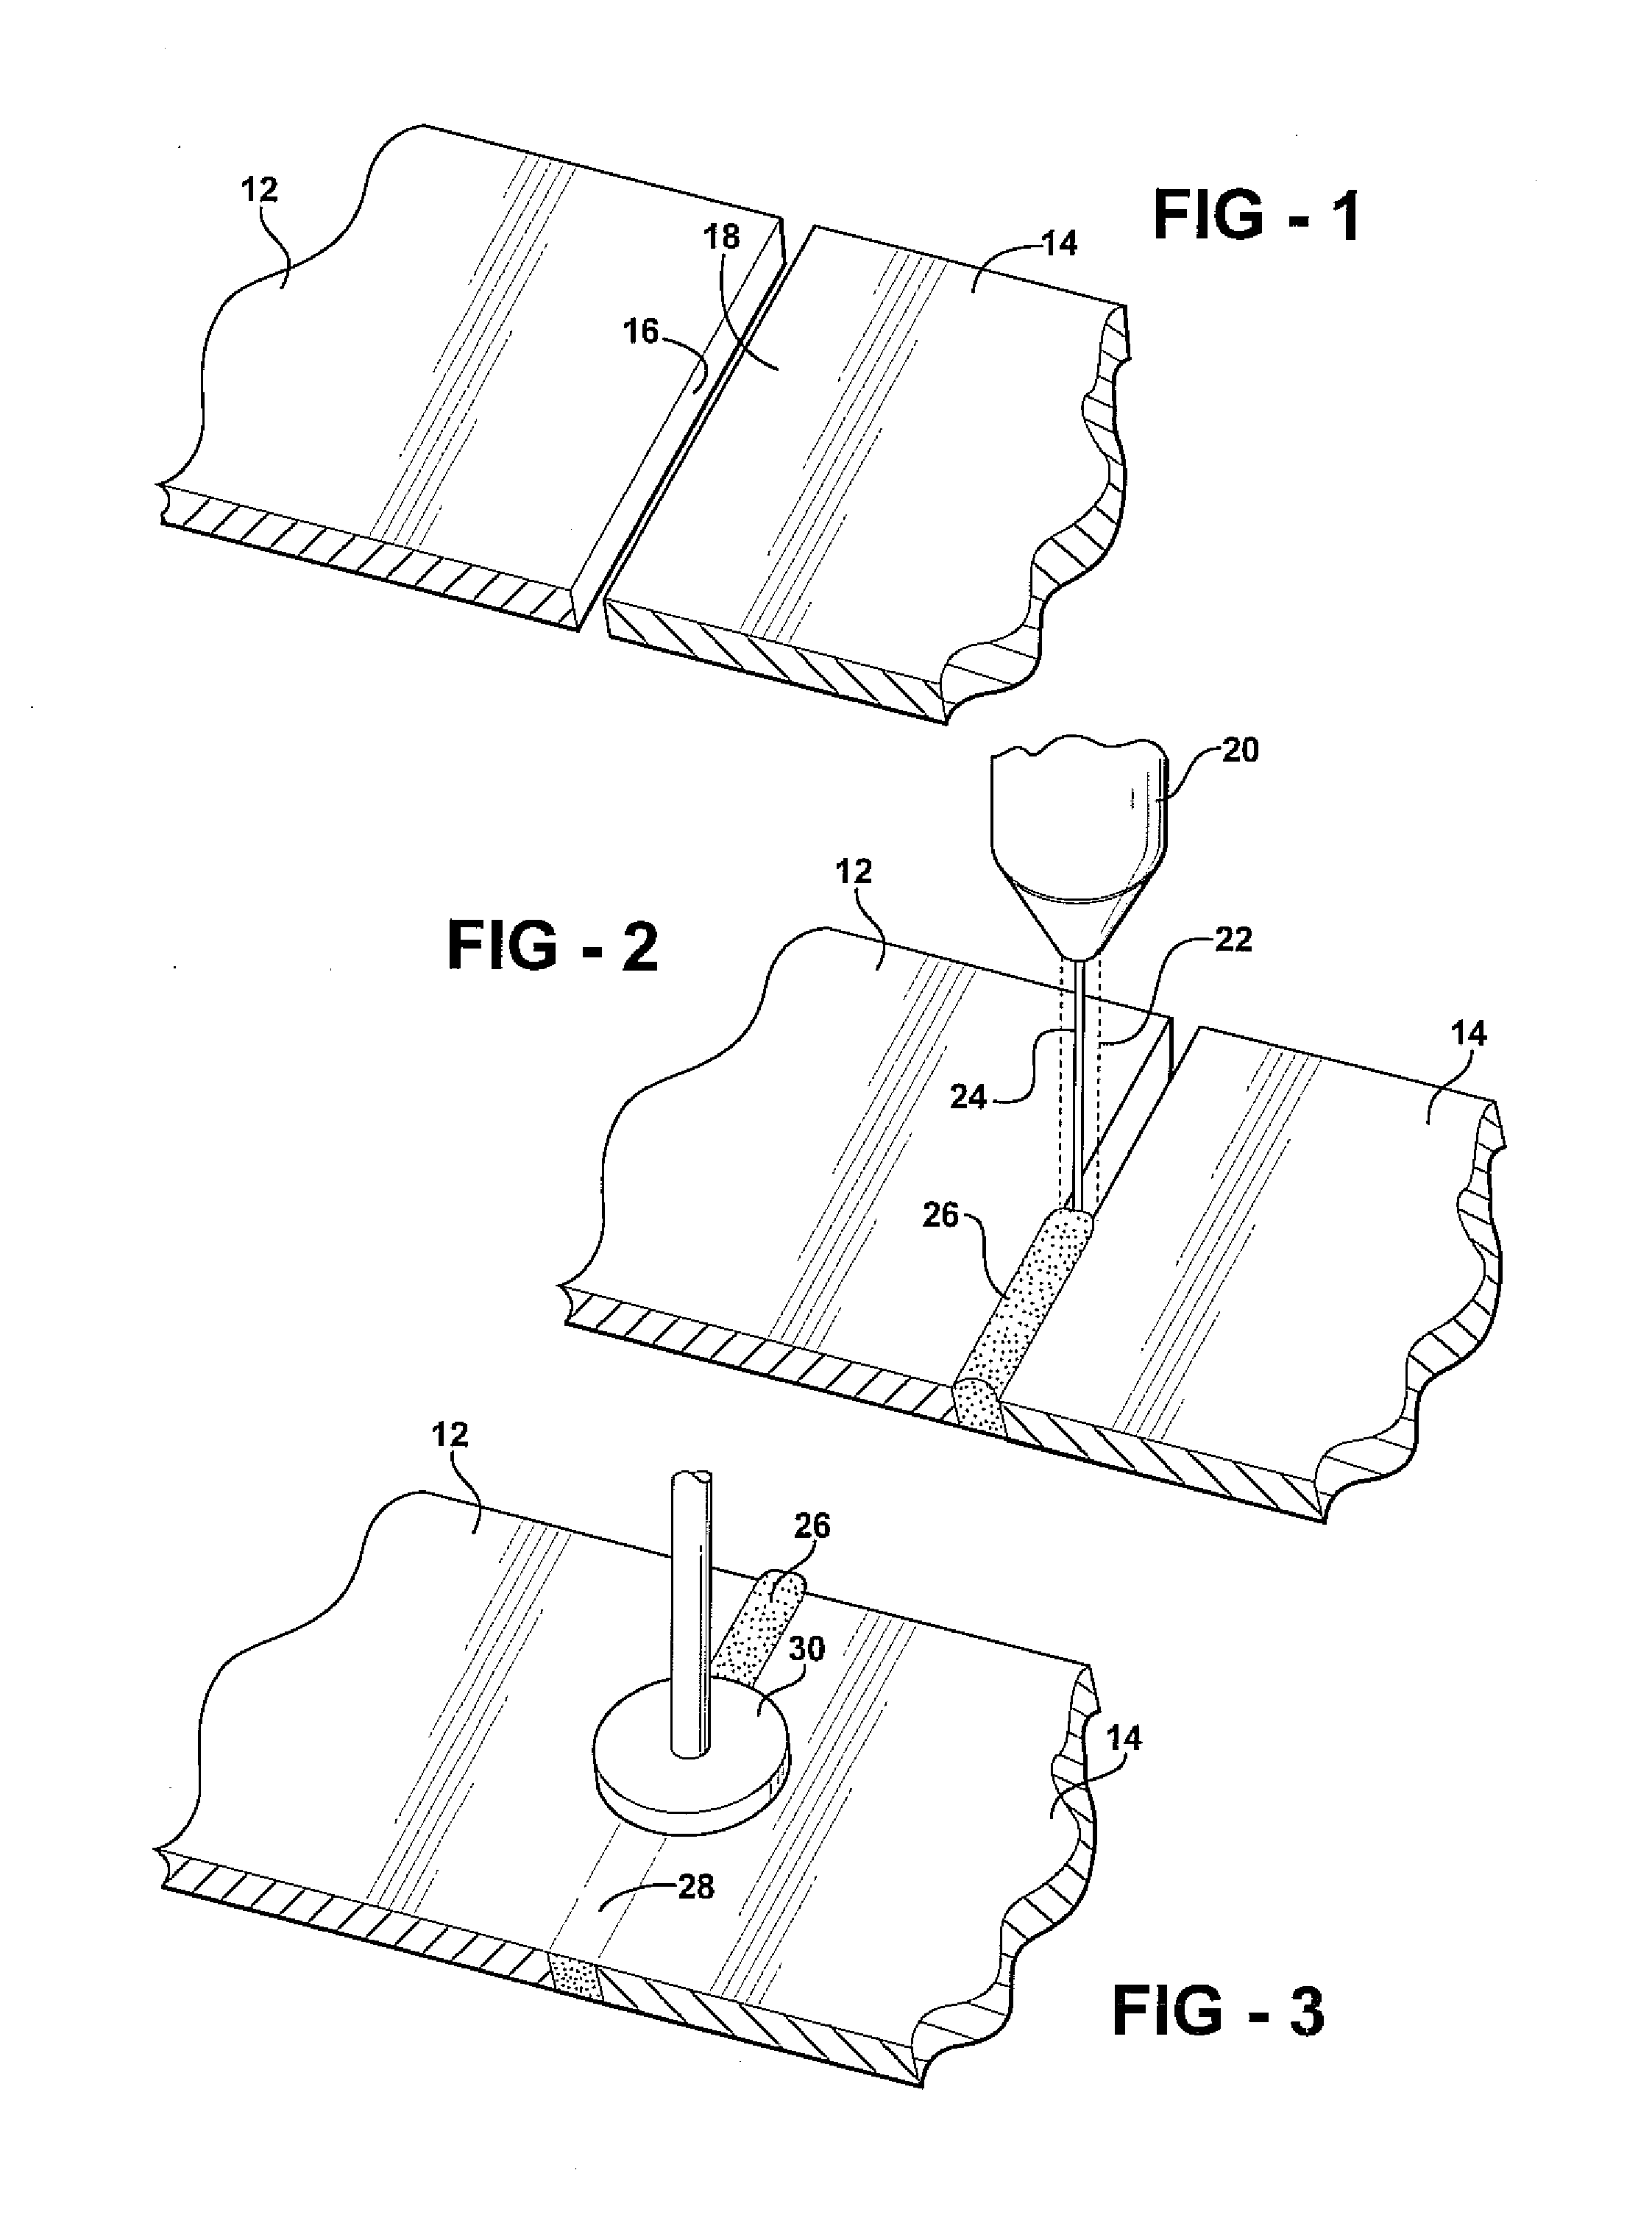 Method of manufacturing a welded metal panel having a high quality surface finish